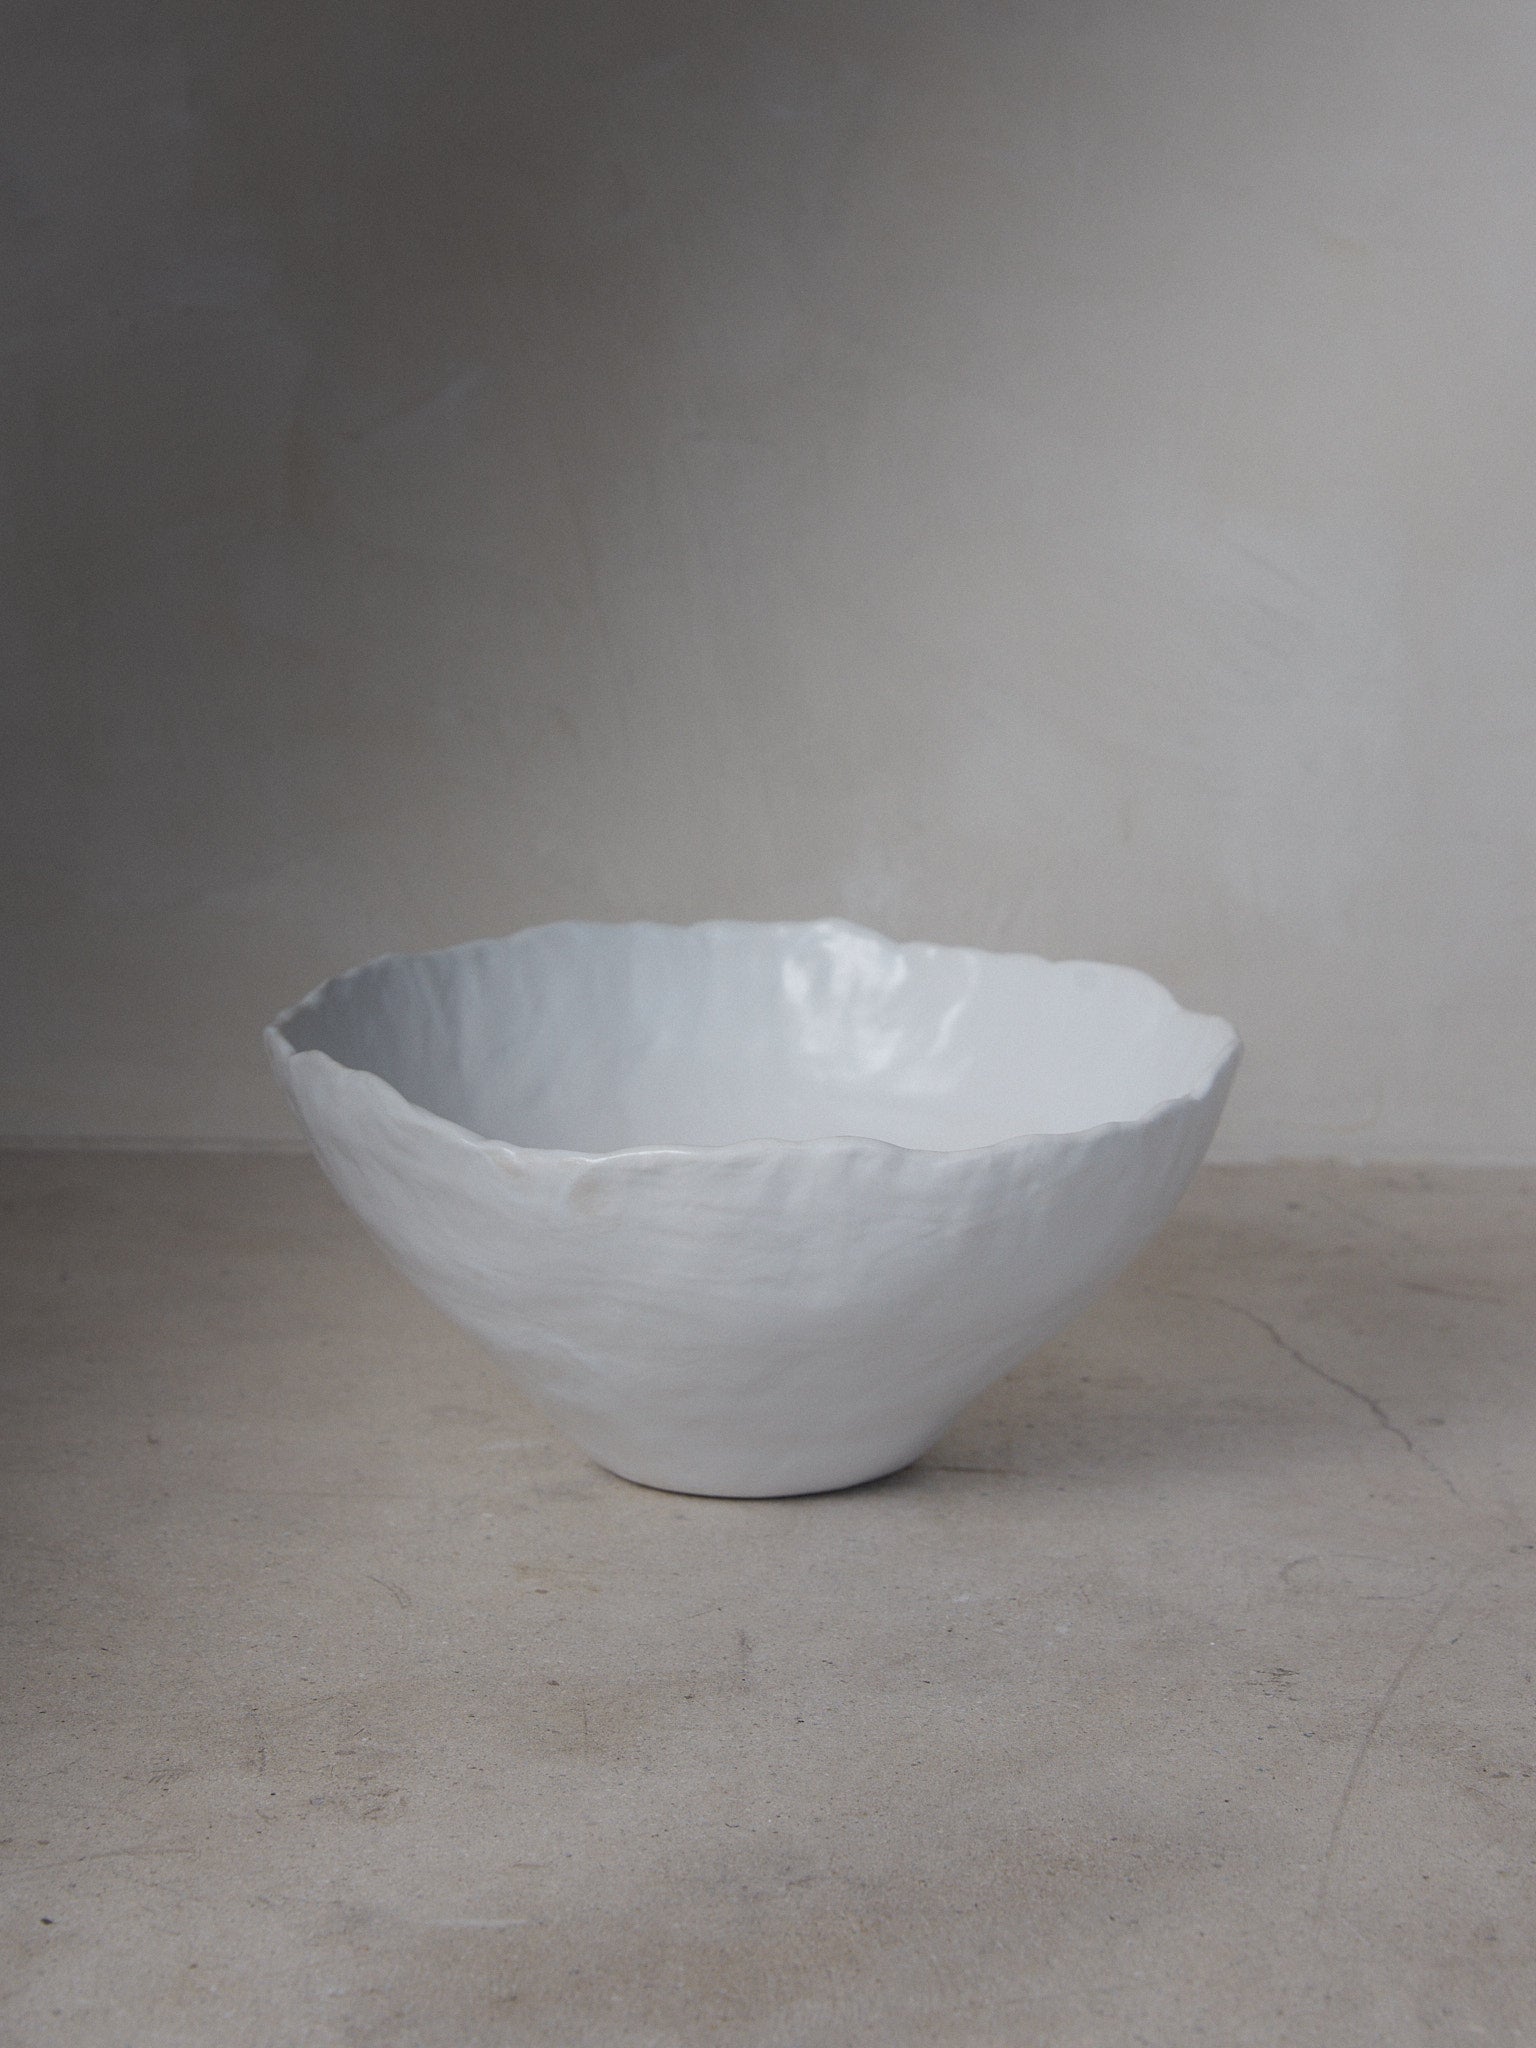 XL Raw Bowl. Exclusively ours. Timelessly elegant, oversize, ceramic bowl with subtly irregular edges revealing the touch of the artist's hand in classic matte white stoneware.